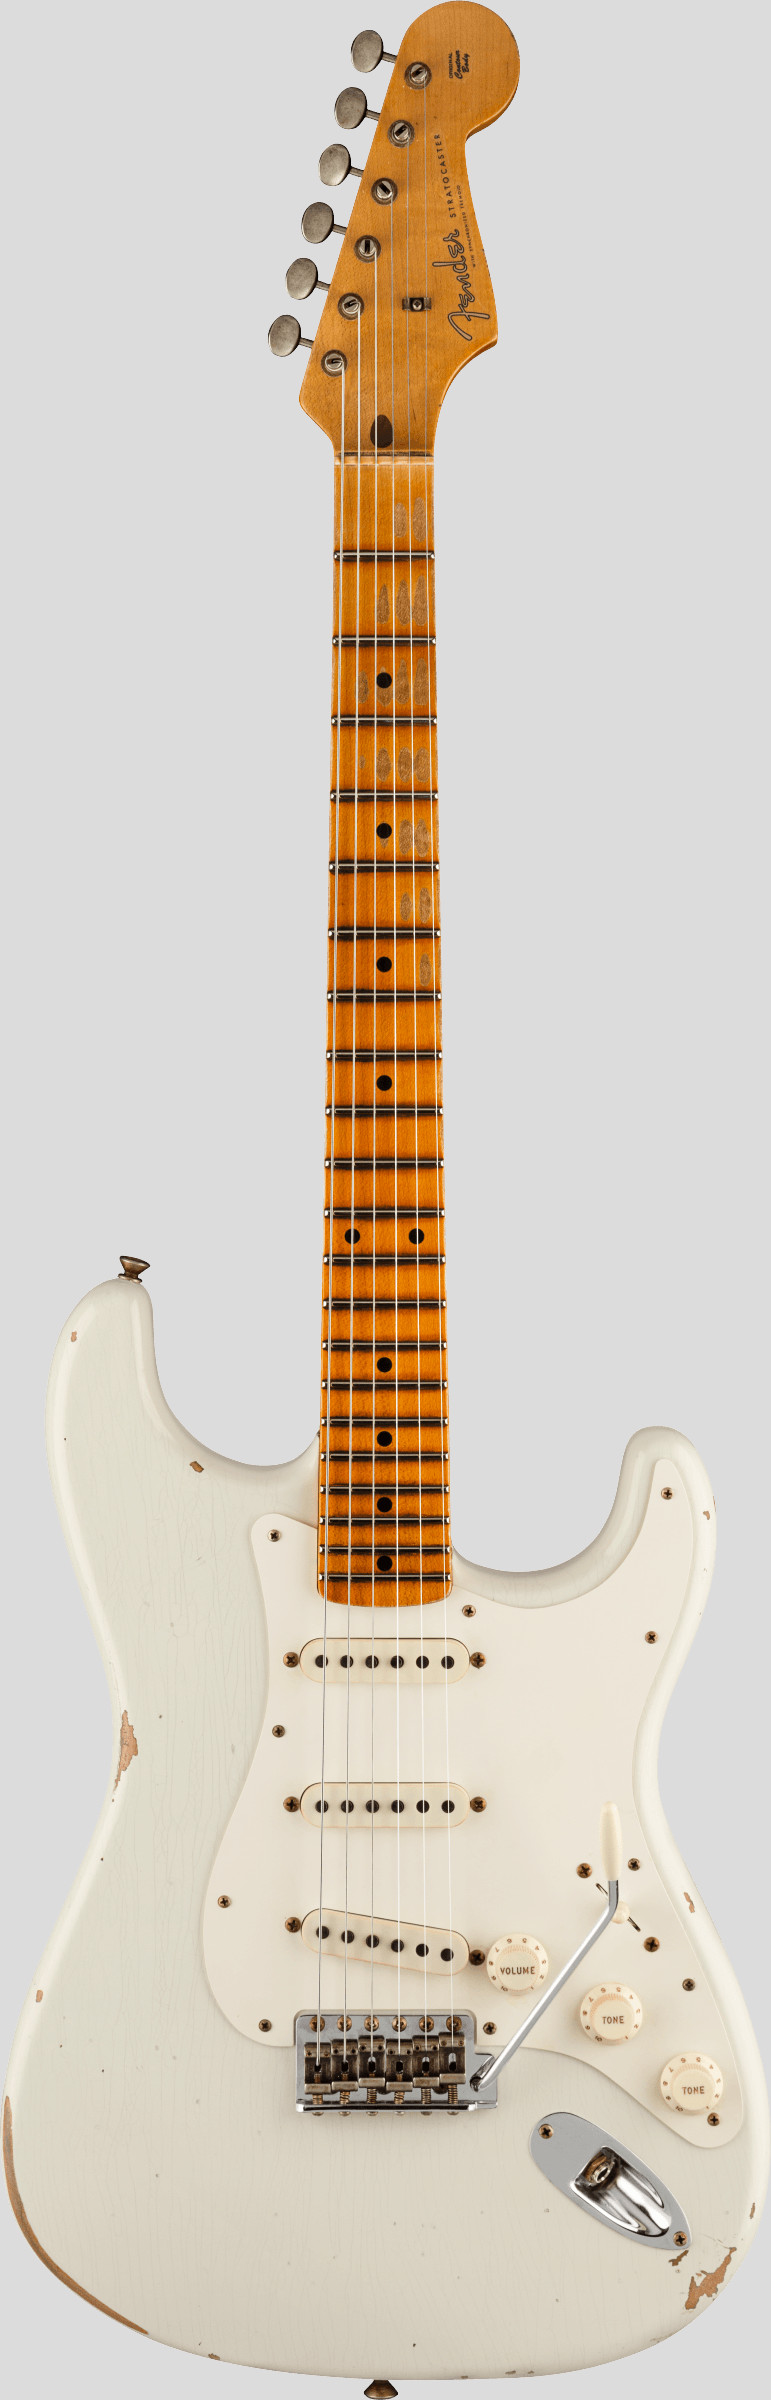 Fender Custom Shop Limited Edition Fat 50 Stratocaster Aged India Ivory Relic 1